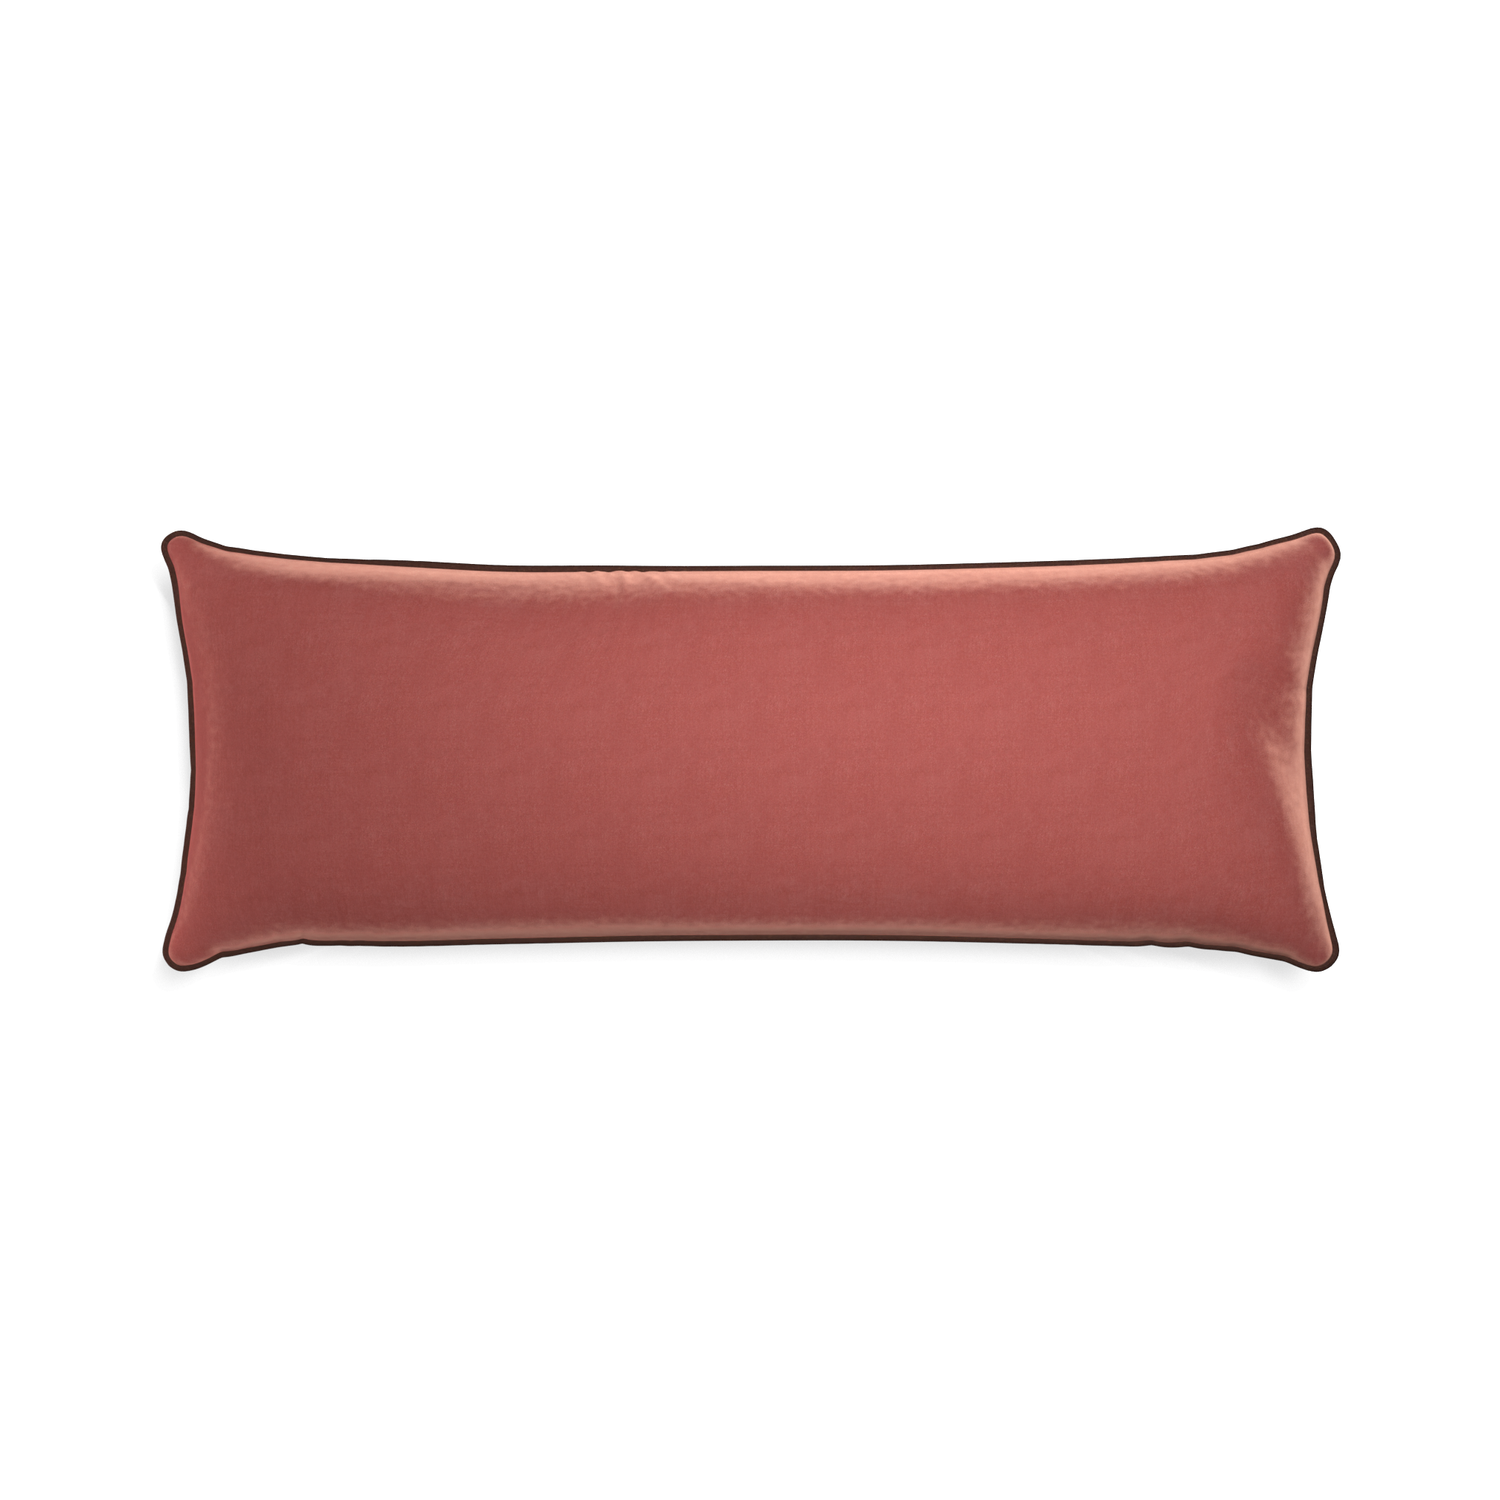 Xl-lumbar cosmo velvet custom pillow with w piping on white background